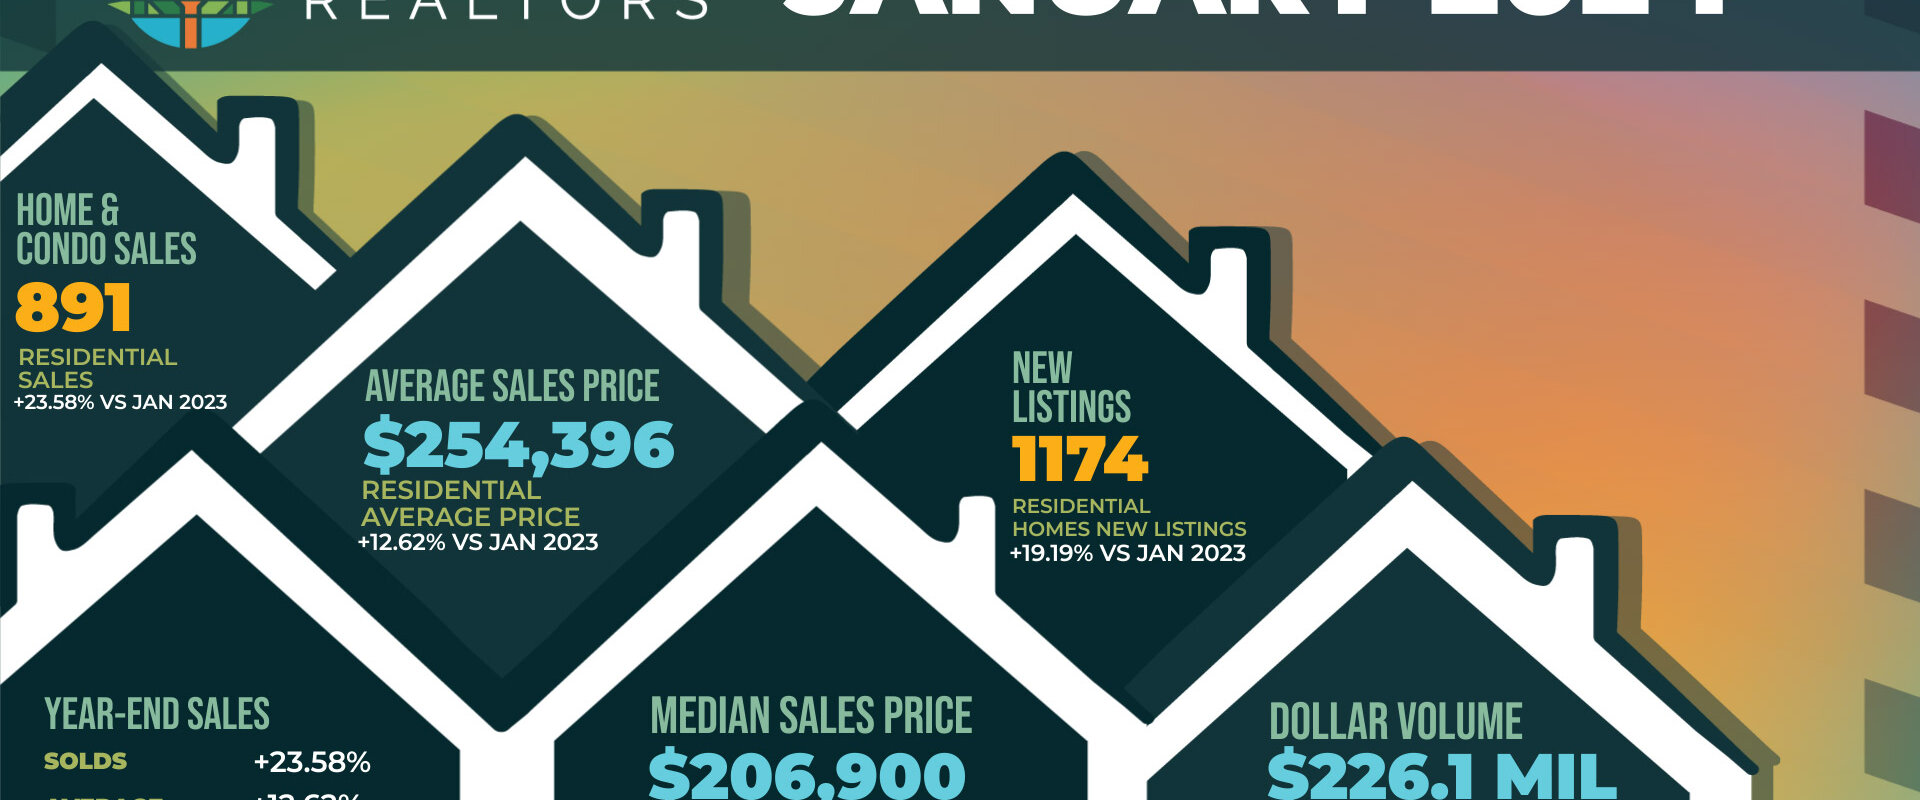 Infographic of Dayton Realtors January 2024 housing market update showing increases in home and condo sales by 23.58%, average sales price reaching $254,396, new listings at 1,174, and a significant growth in dollar volume to $226.1 million compared to the previous year.